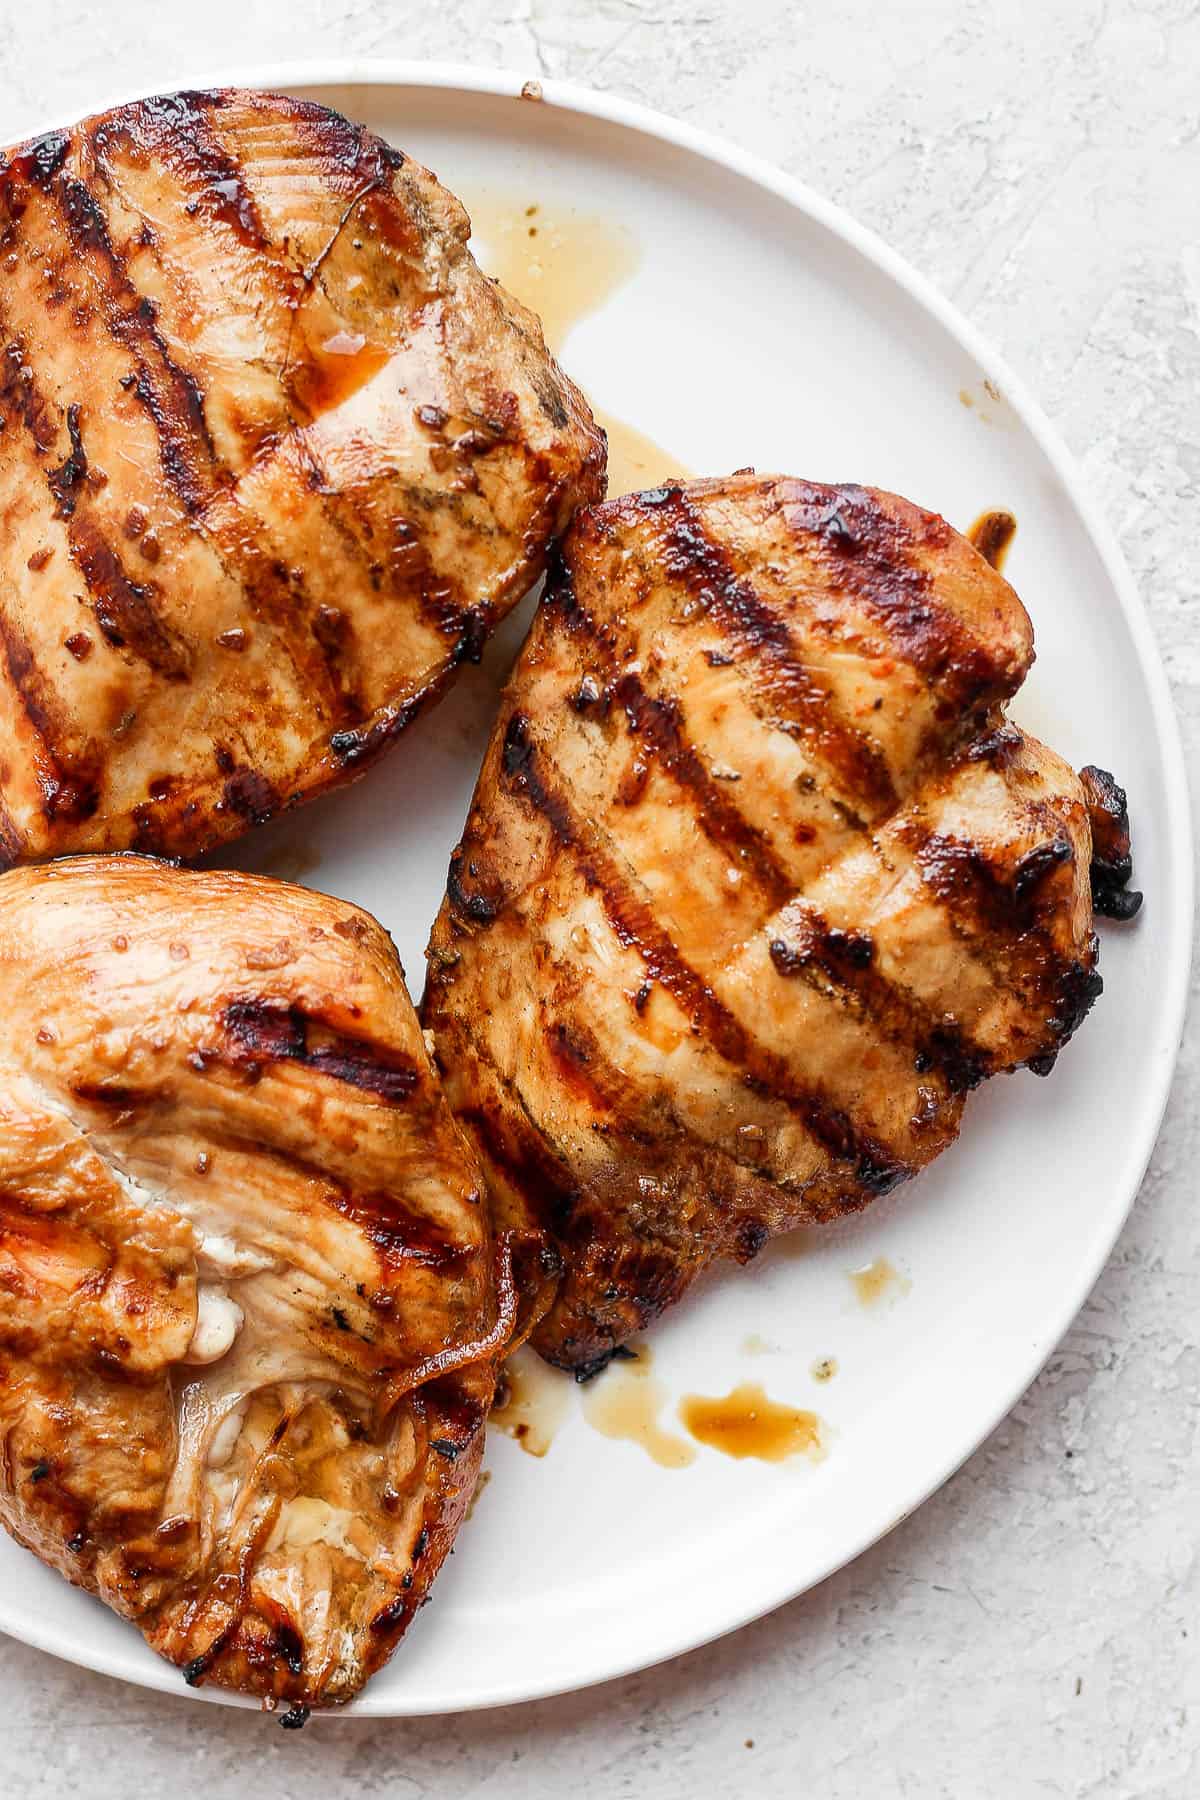 Marinated and grilled chicken breast on a white plate.